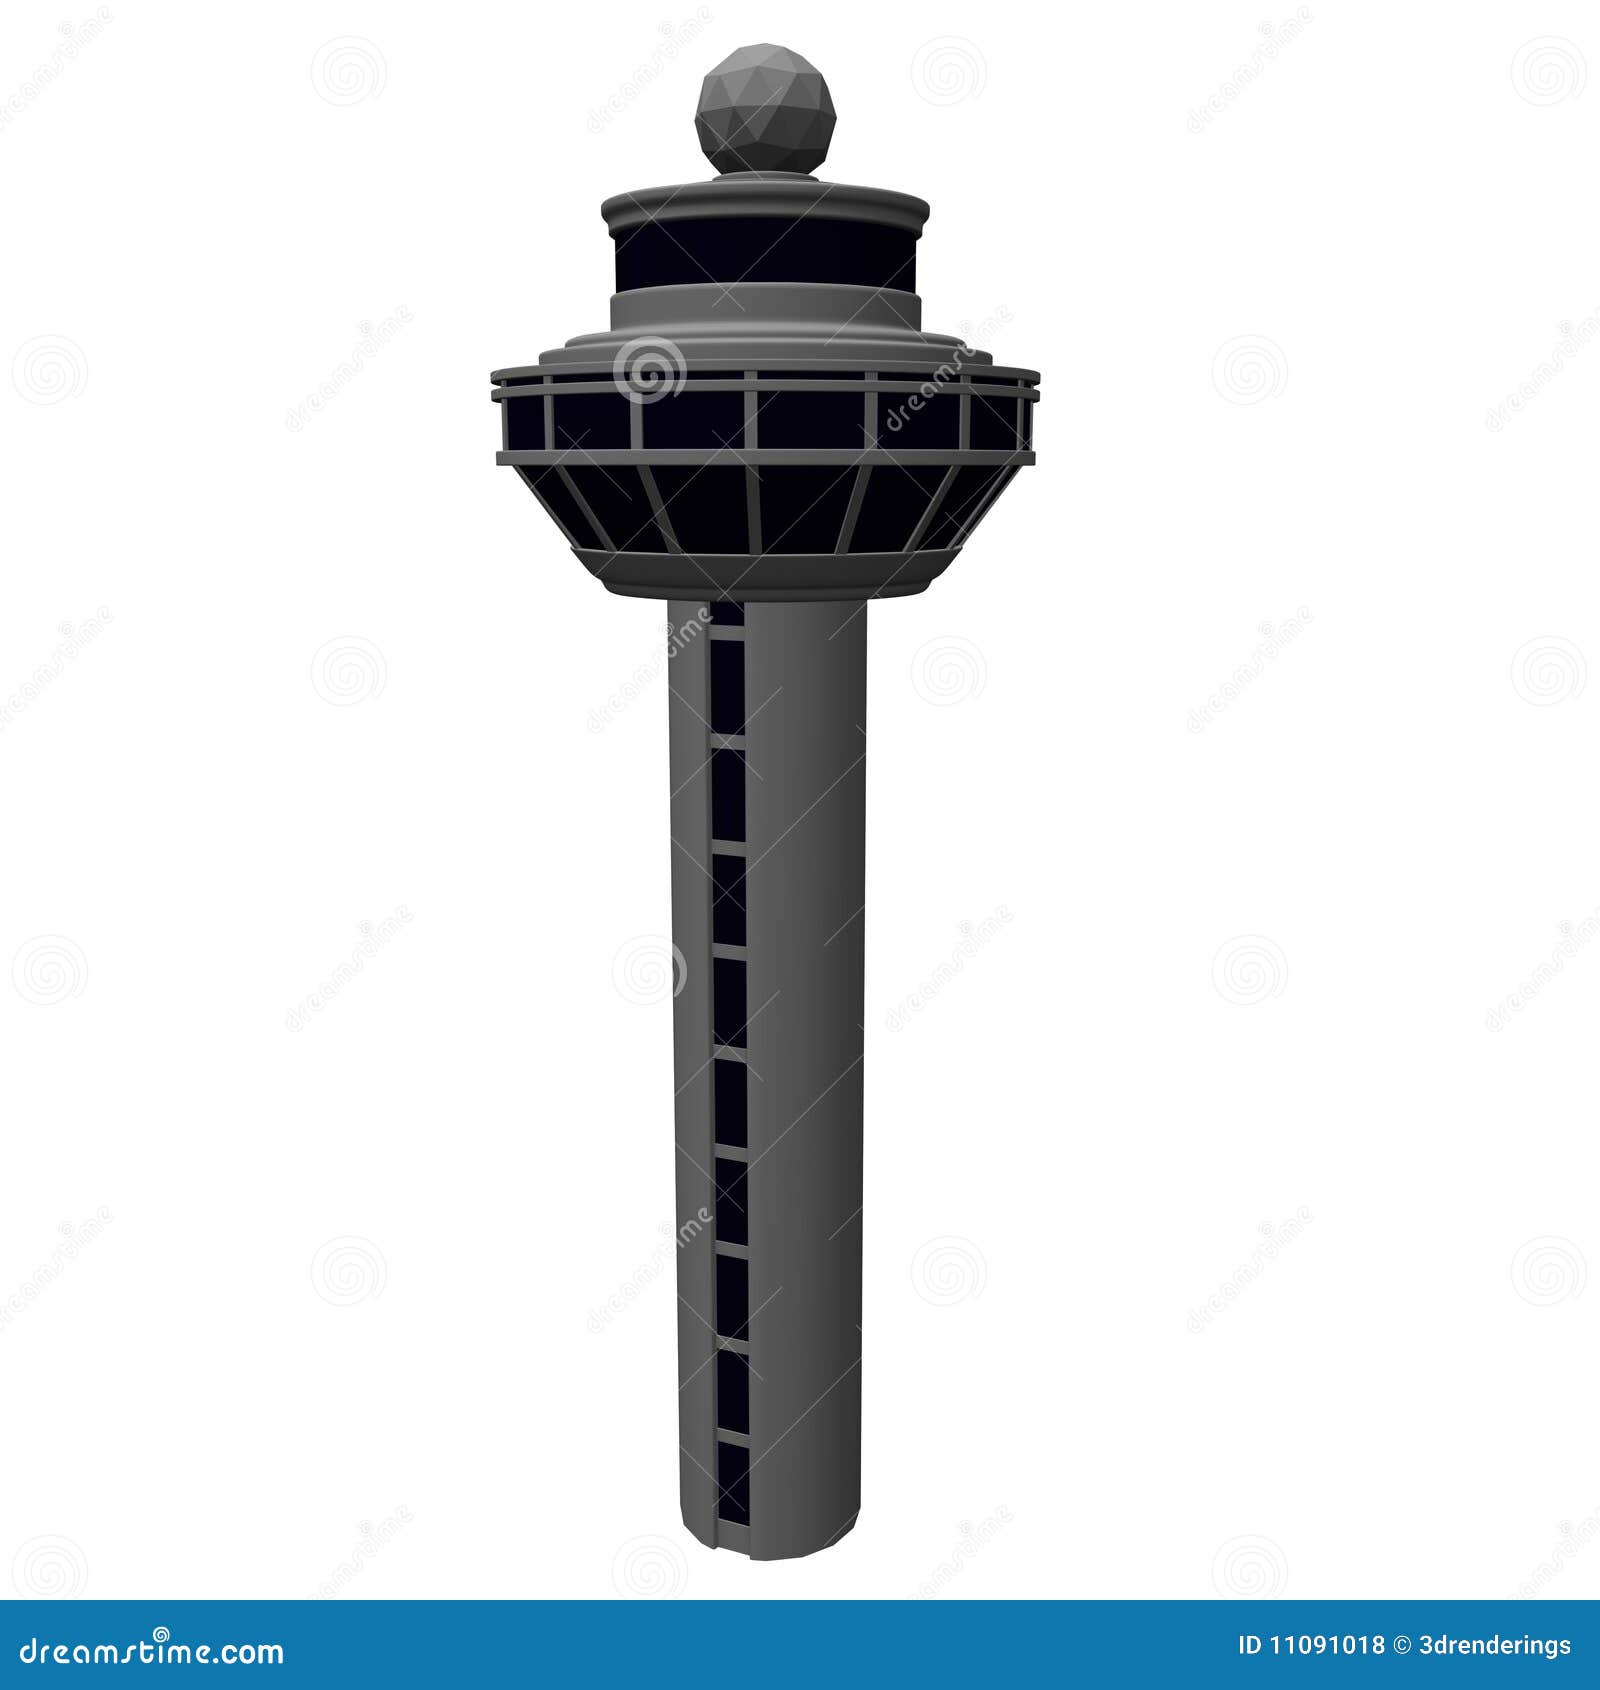 airport tower clipart - photo #4